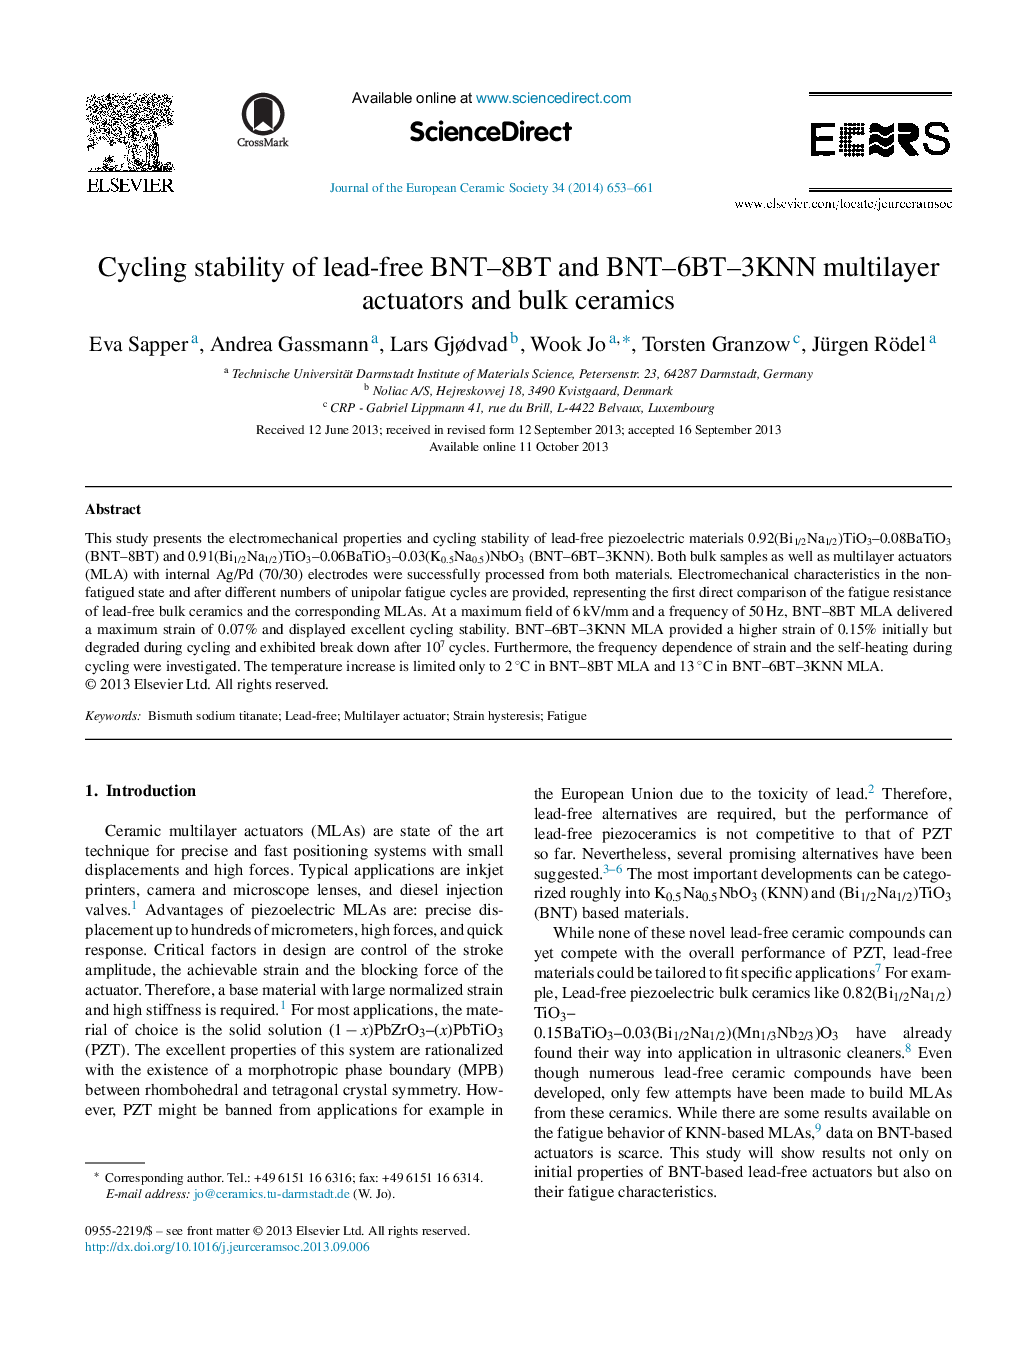 Cycling stability of lead-free BNT-8BT and BNT-6BT-3KNN multilayer actuators and bulk ceramics